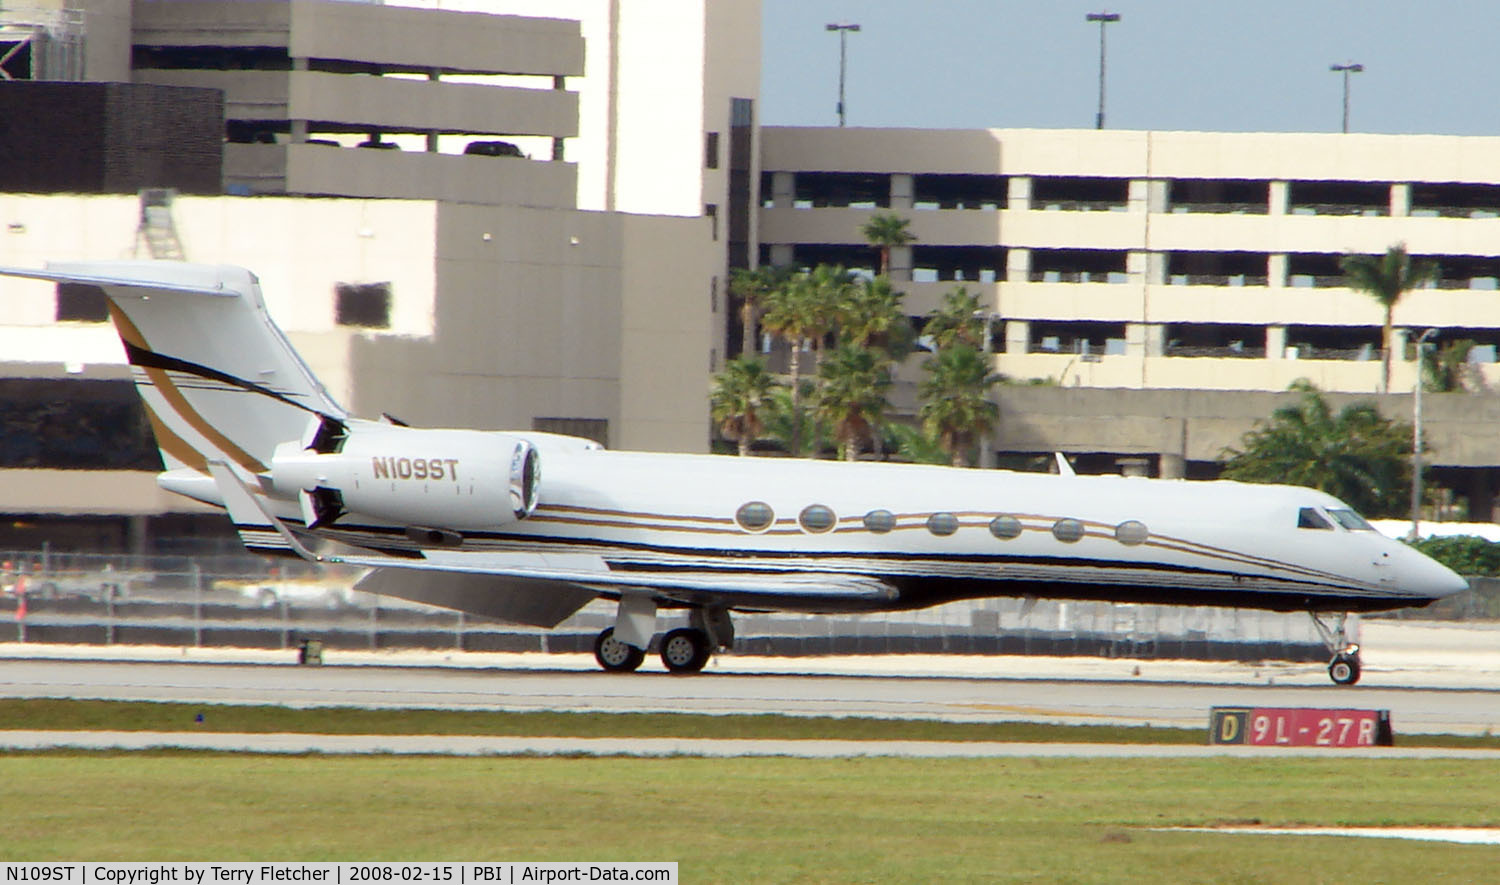 N109ST, 2004 Gulfstream Aerospace GV-SP (G550) C/N 5049, The business aircraft traffic at West Palm Beach on the Friday before President's Day always provides the aviation enthusiast / photographer with a treat